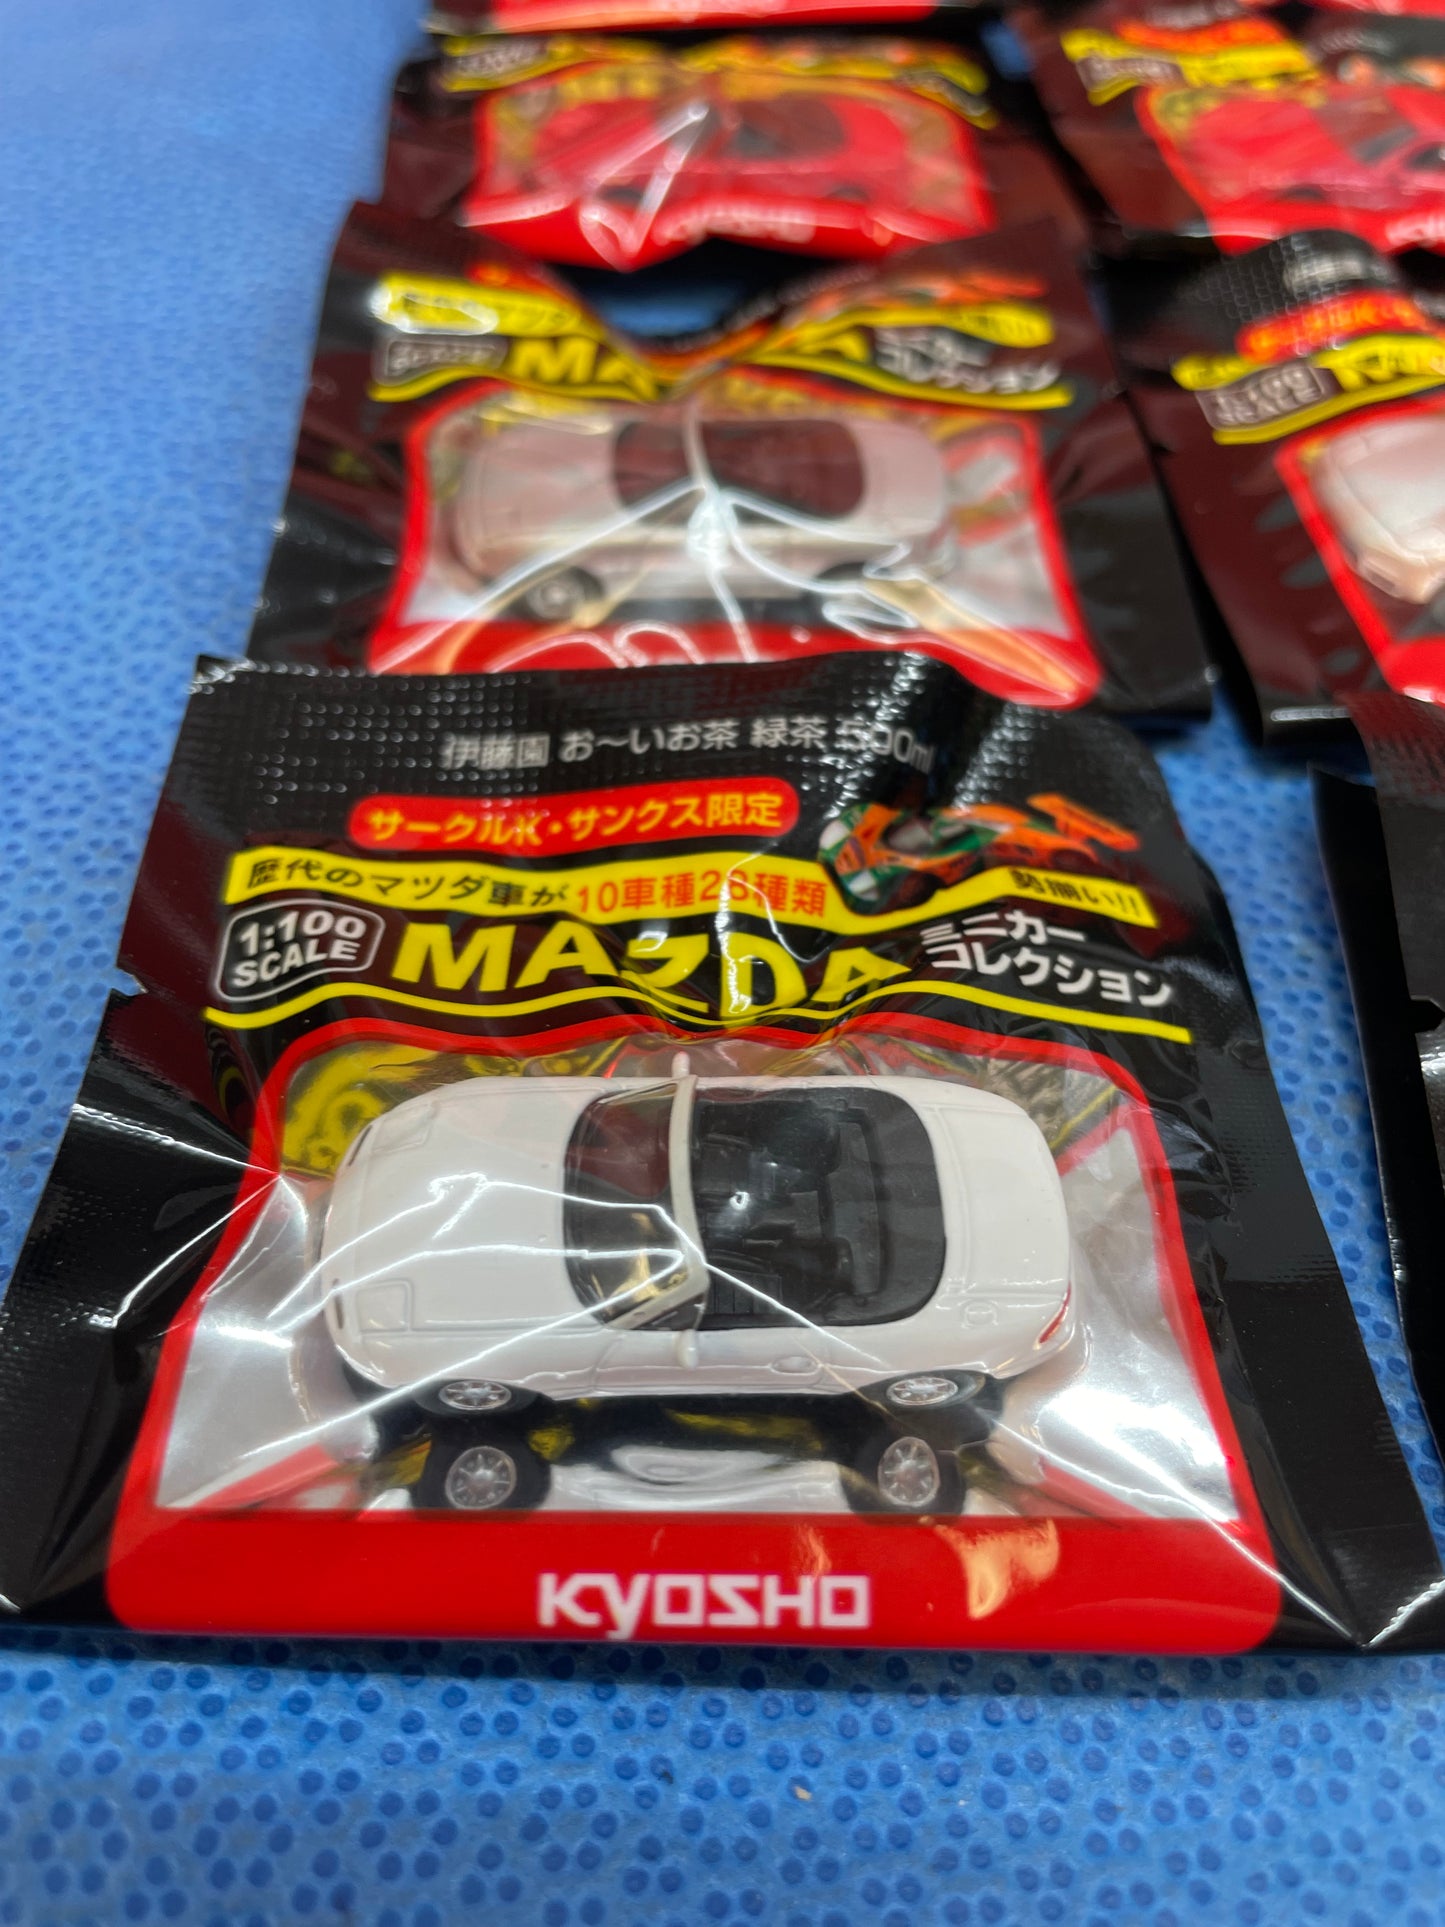 MAZDA Kyosho 1:100 Scale Diecast Model Car Complete set of 28 RX-8 RX-3 787B Mazda Rx7 FD3S FD - RX7Parts